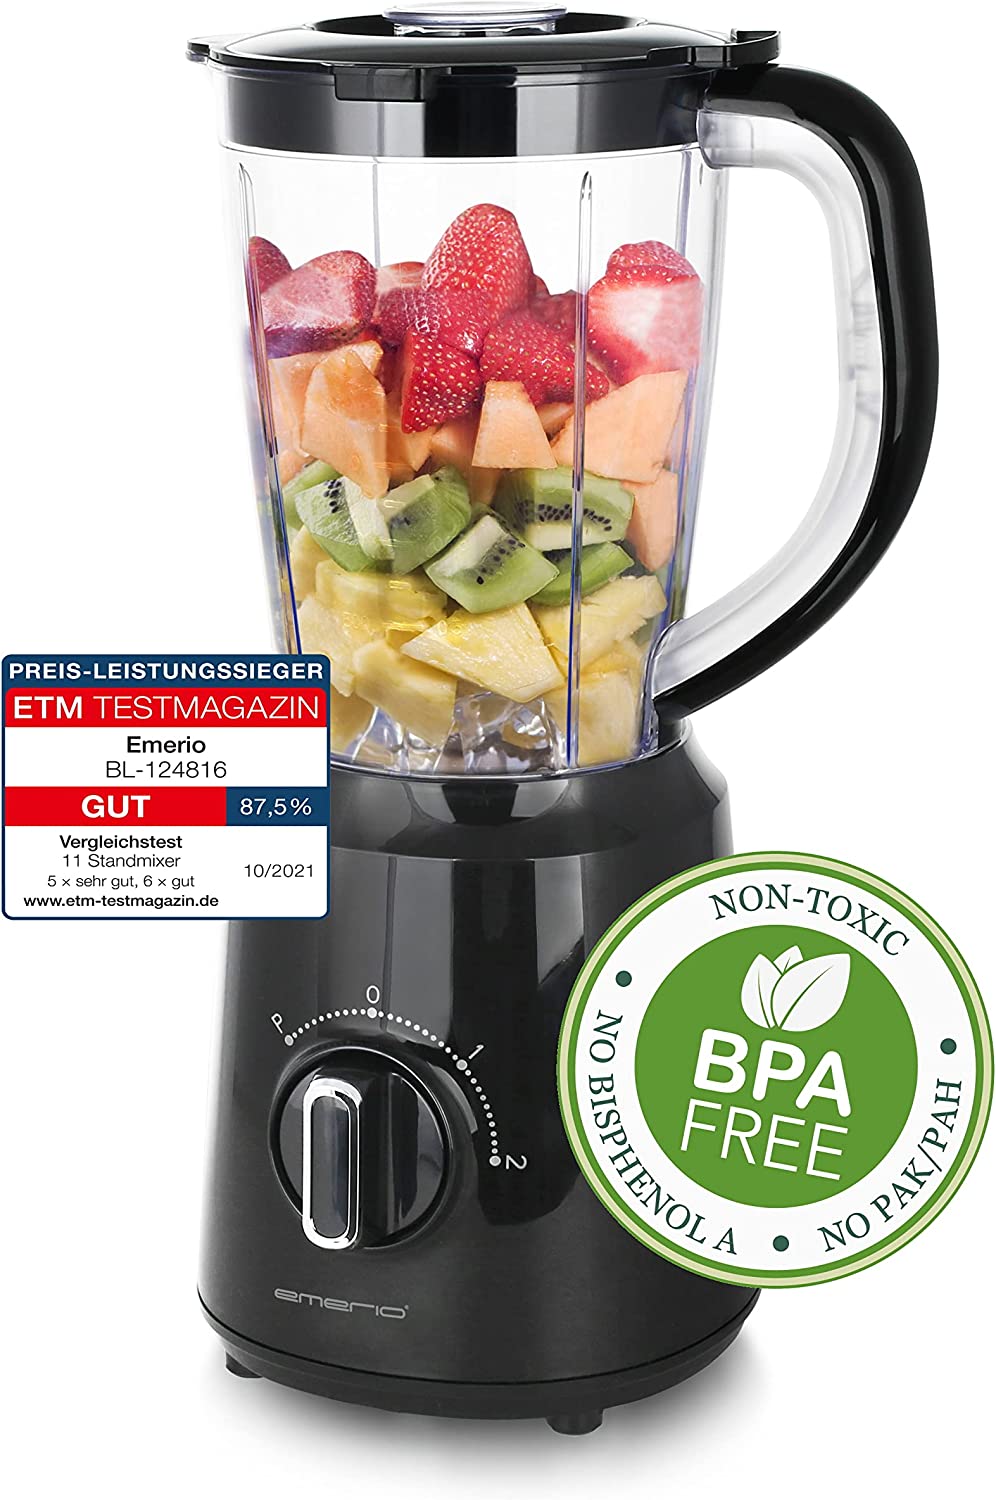 Emerio BL-12816.8 Blender BPA-Free Crush Ice Function 1.5 L Container 2 Speeds + Pulse Function Blade Unit Made of Stainless Steel Safety Switch Dishwasher Safe 500 Watt Black